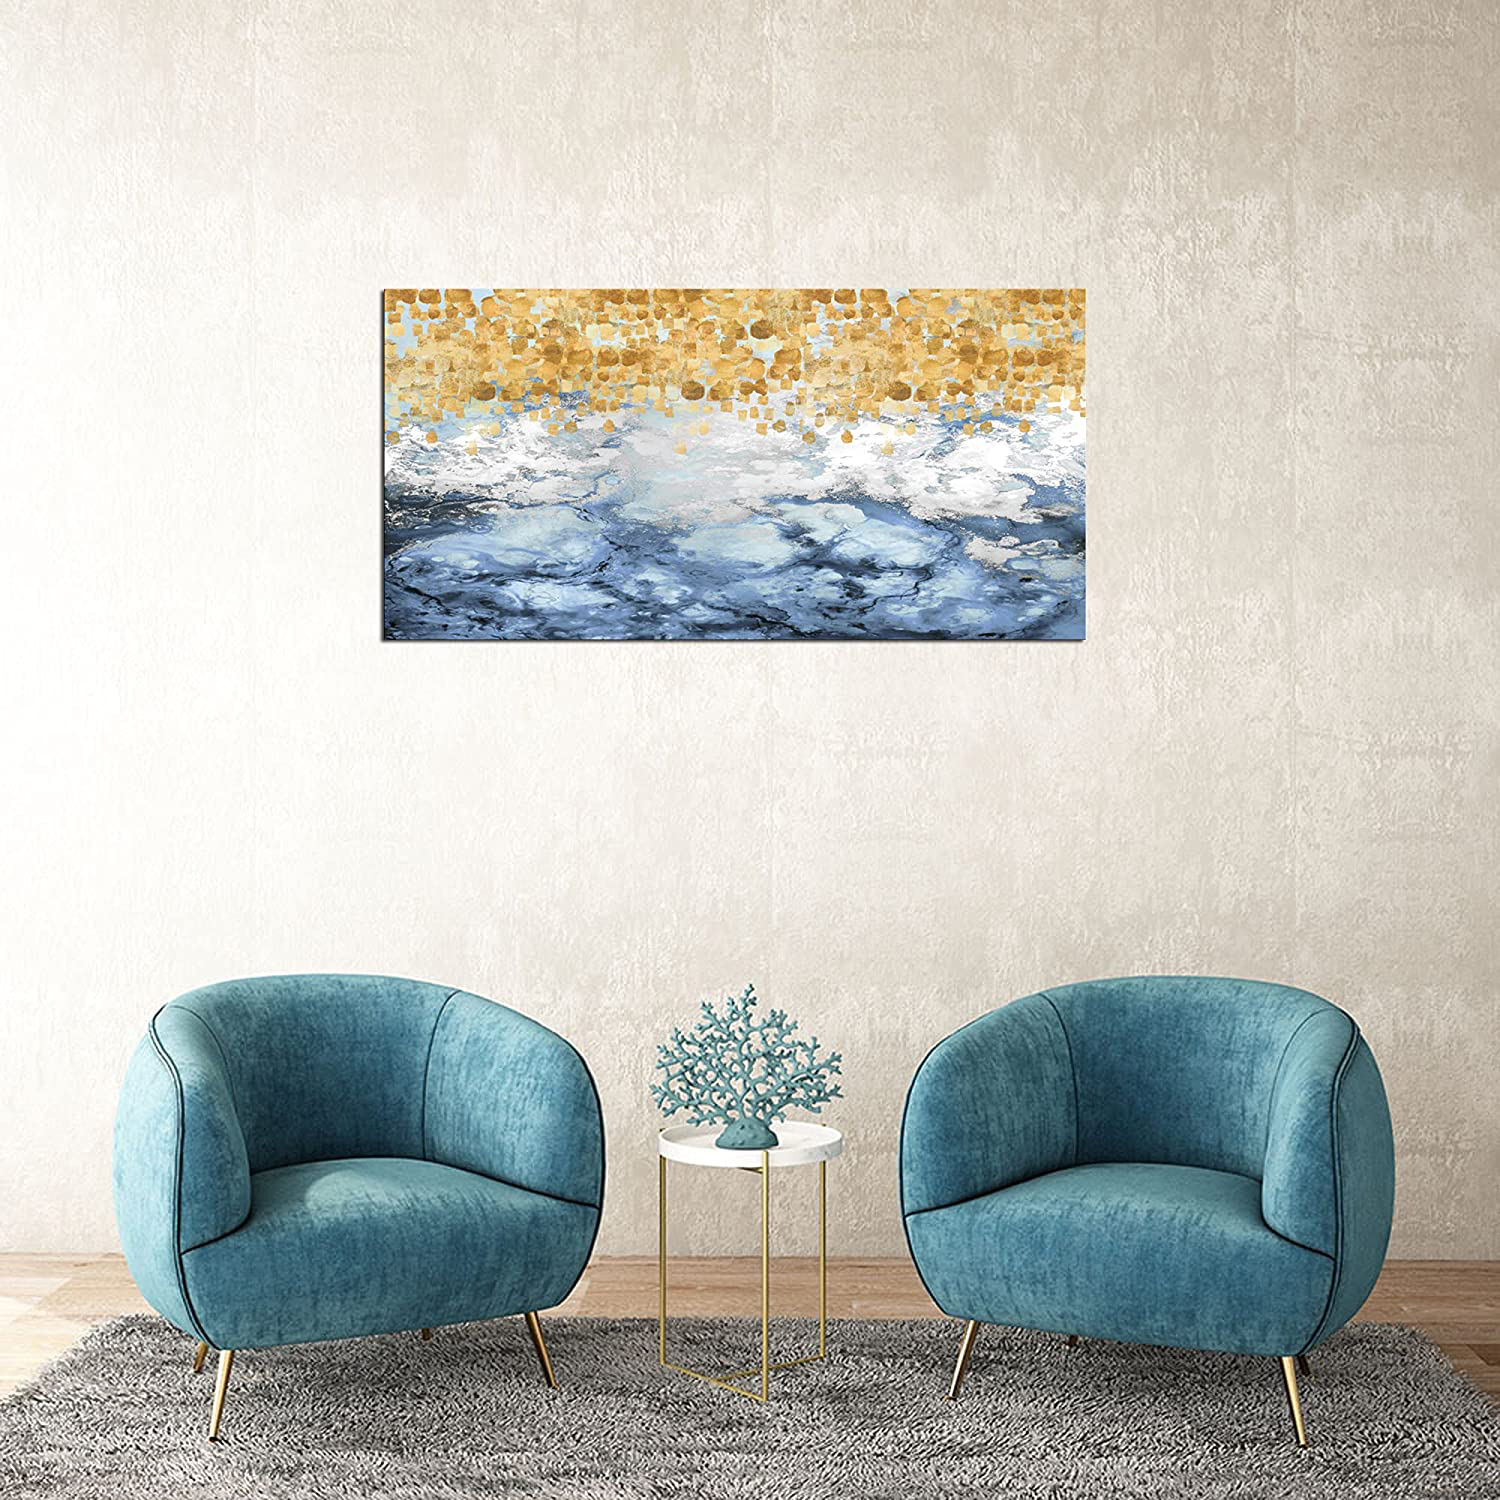 XXMWallArt FC2062 Abstract Painting Modern Decor Wall Art Gold Colorful Abstract Painting Background Canvas for Living Room Bedroom Kitchen Home and Office Wall Decor